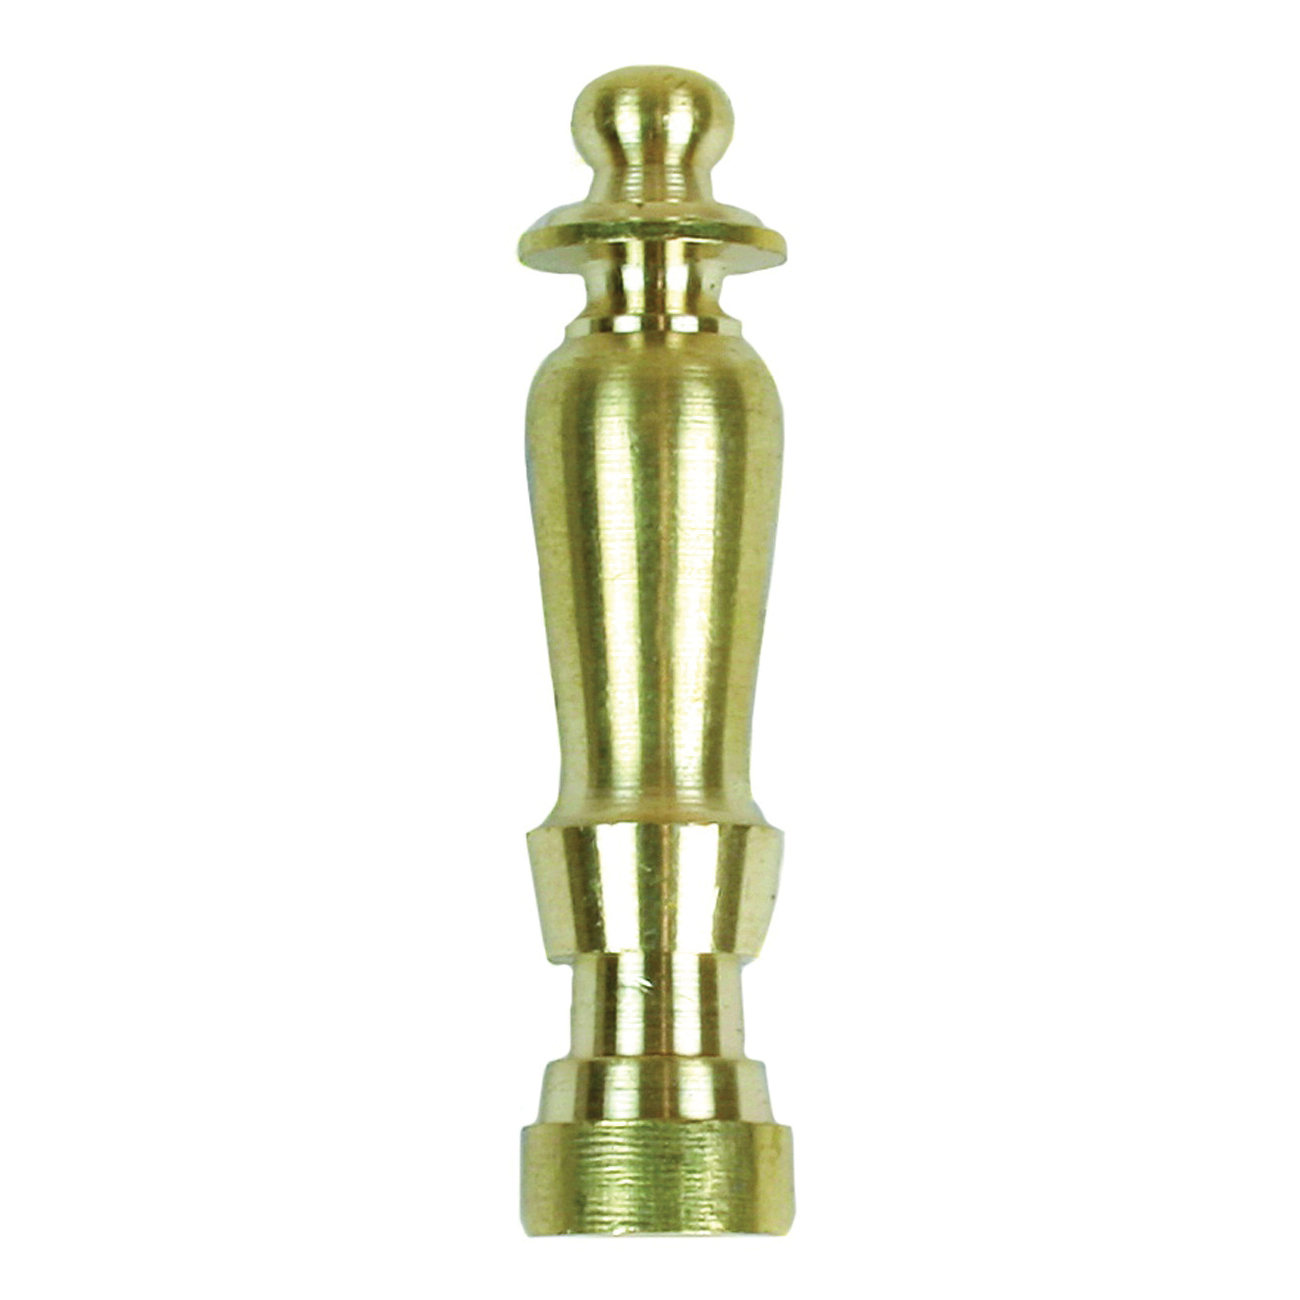 60100 Spindle Finial, Solid Brass